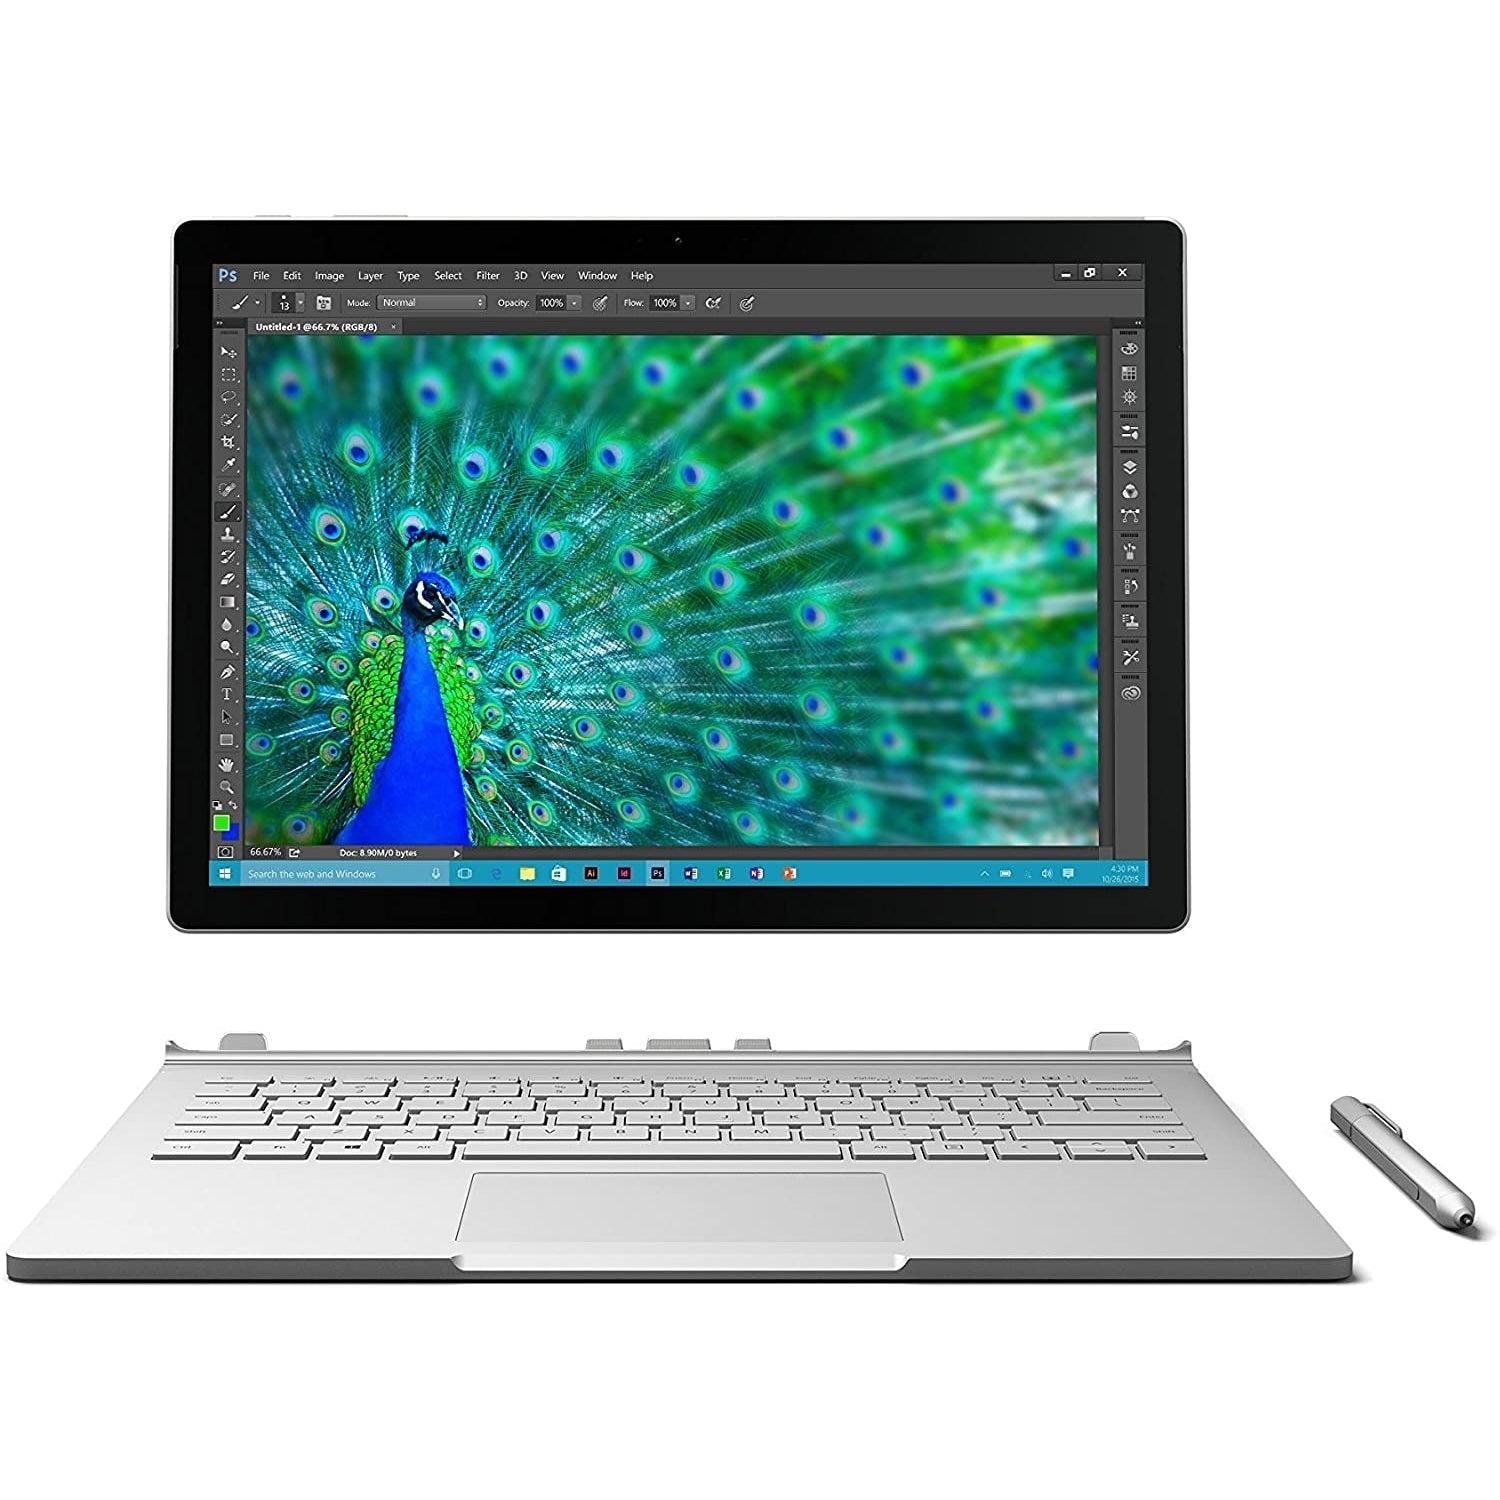 Microsoft Surface Book 13.5" Laptop Intel Core i5 8GB RAM 128GB SSD - Silver - Refurbished Excellent - No Charger